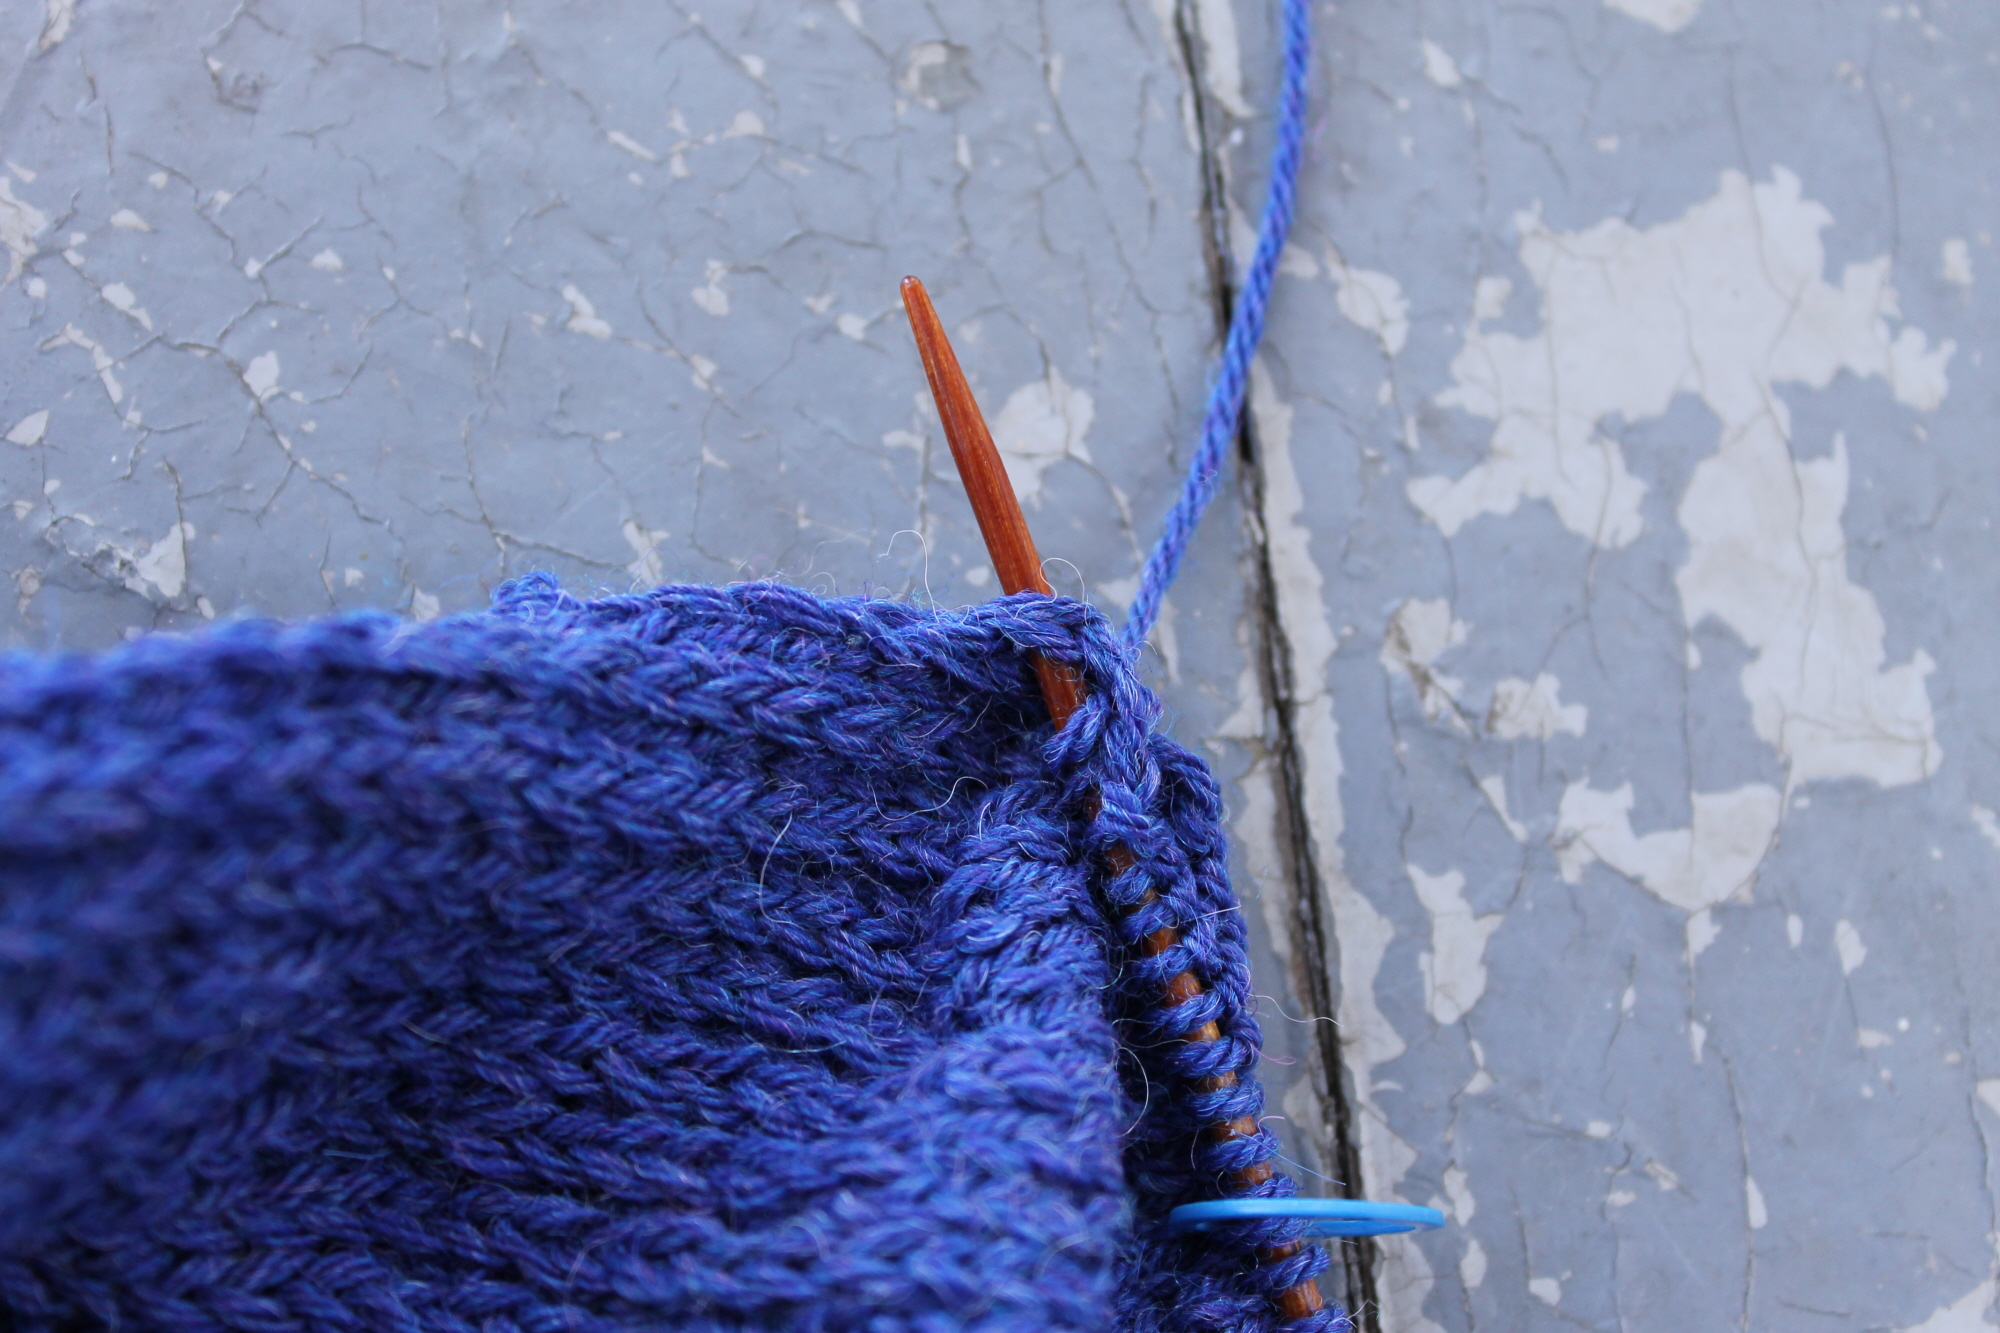 Inserting the needle into the slipped stitch